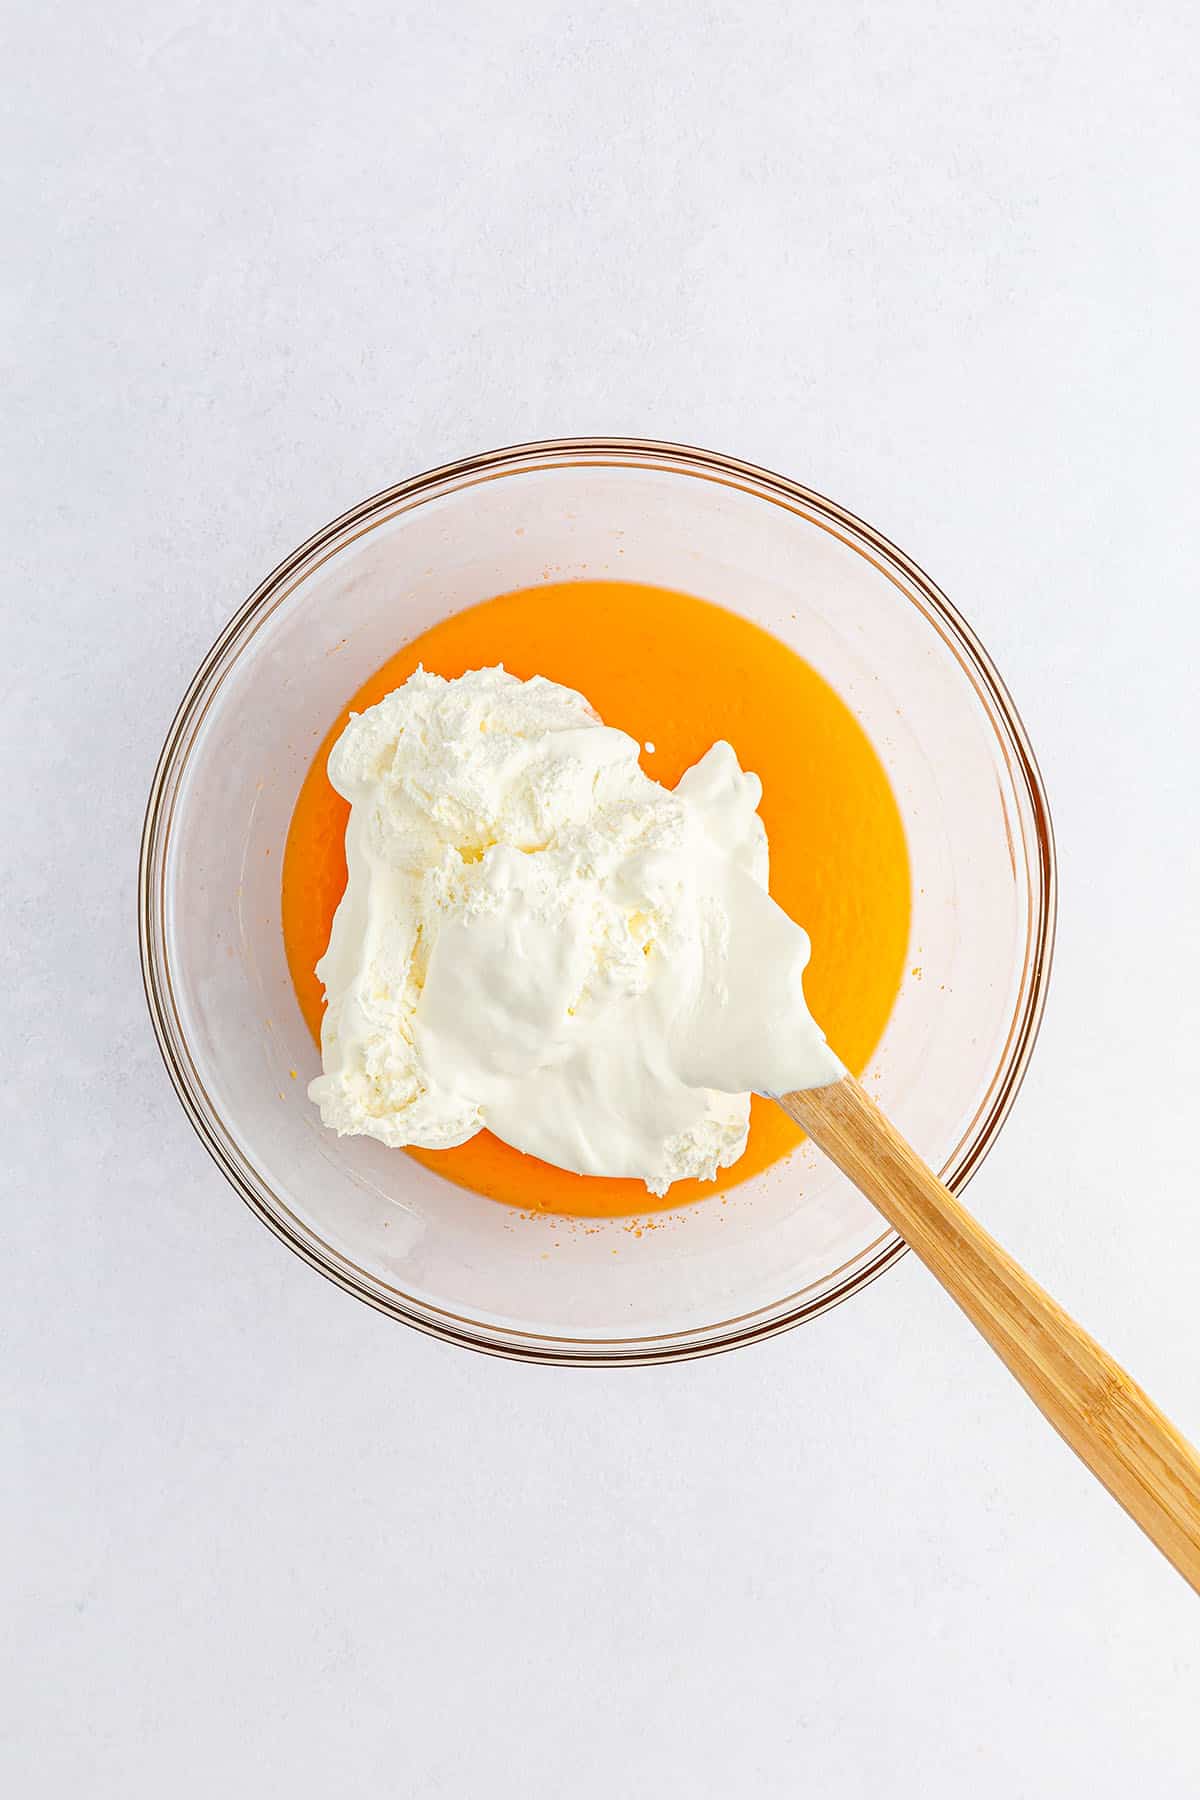 Orange pudding mixture with whipped cream on top